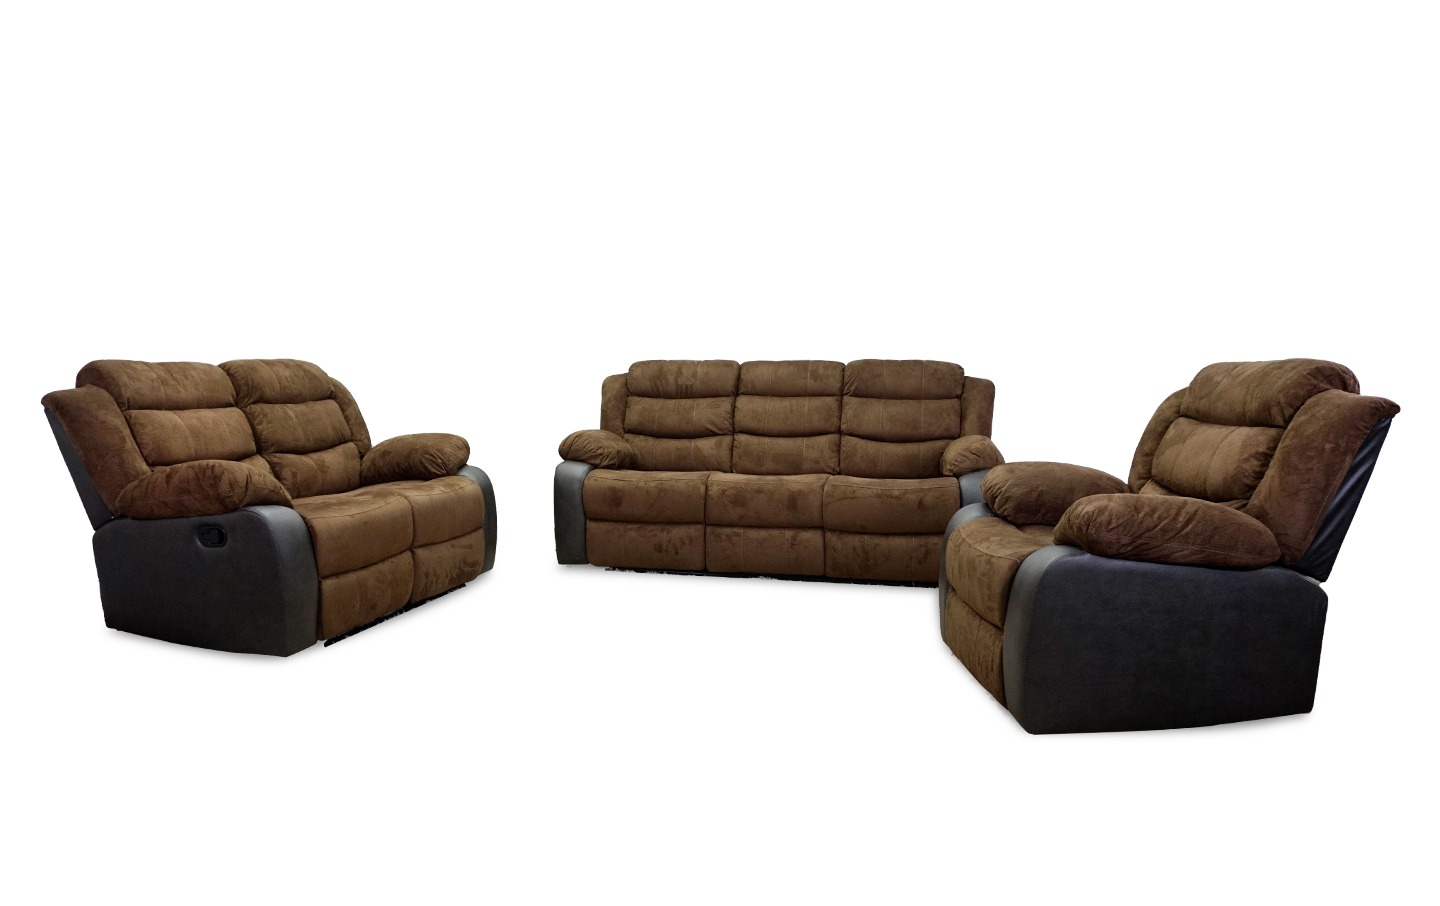 Gibson Reclining Sofa, Loveseat and Recliner